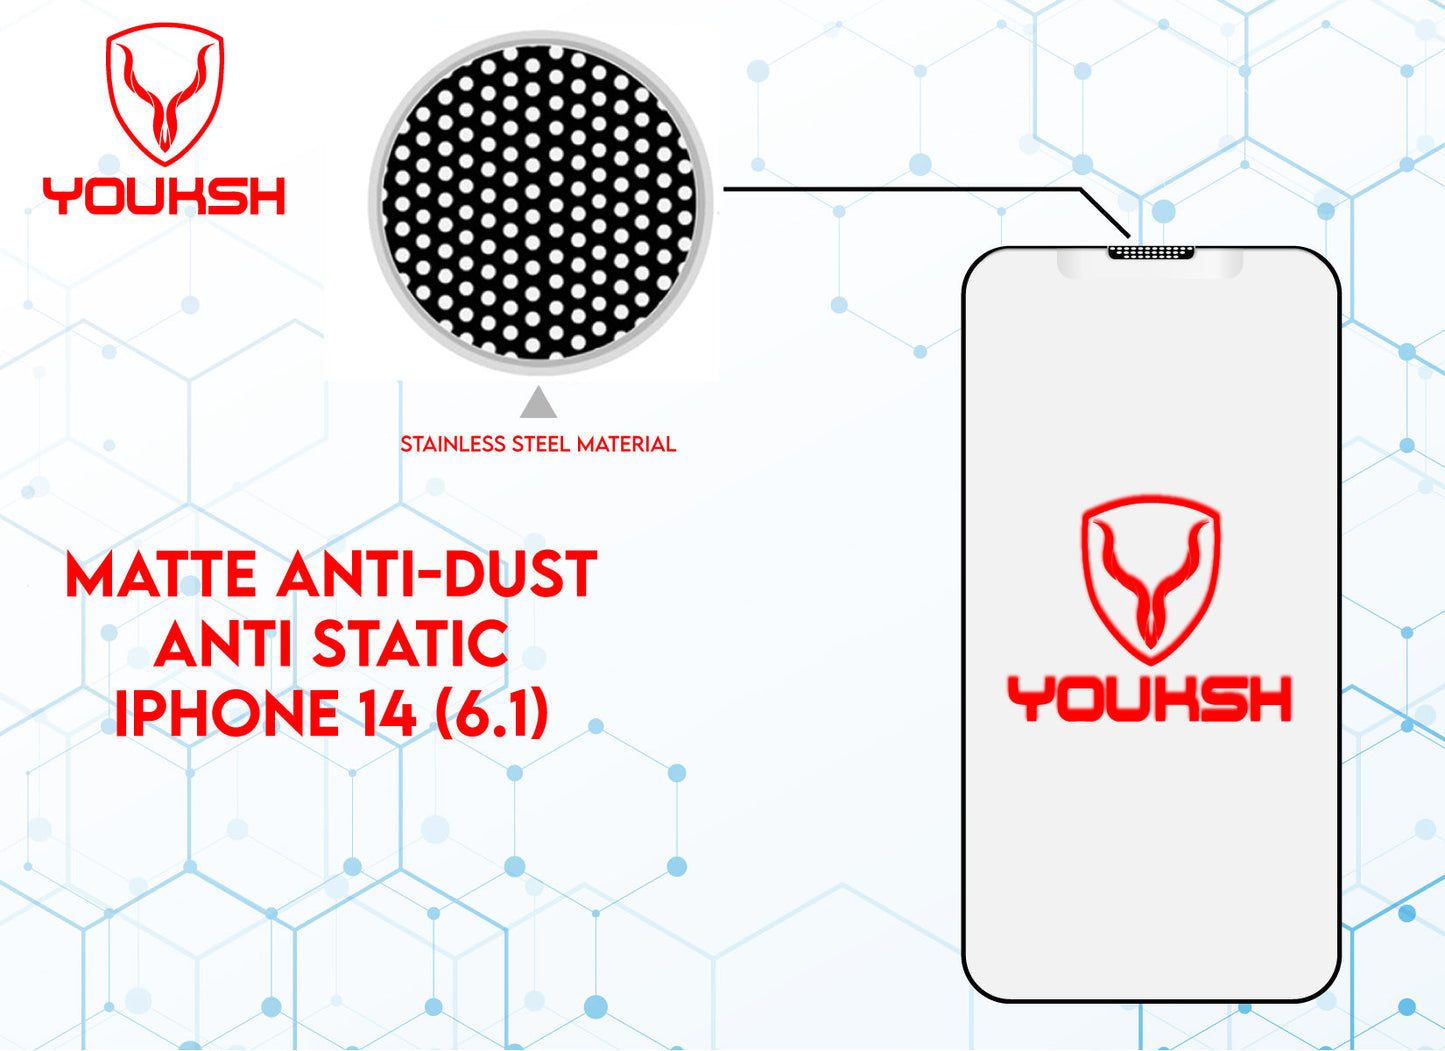 YOUKSH Apple iPhone 14 (6.1) Matte Anti Dust AntiStatic Glass Protector - Apple iPhone 14 (6.1) Anti Dust Matte AntiStatic Glass - With YOUKSH Installation kit.